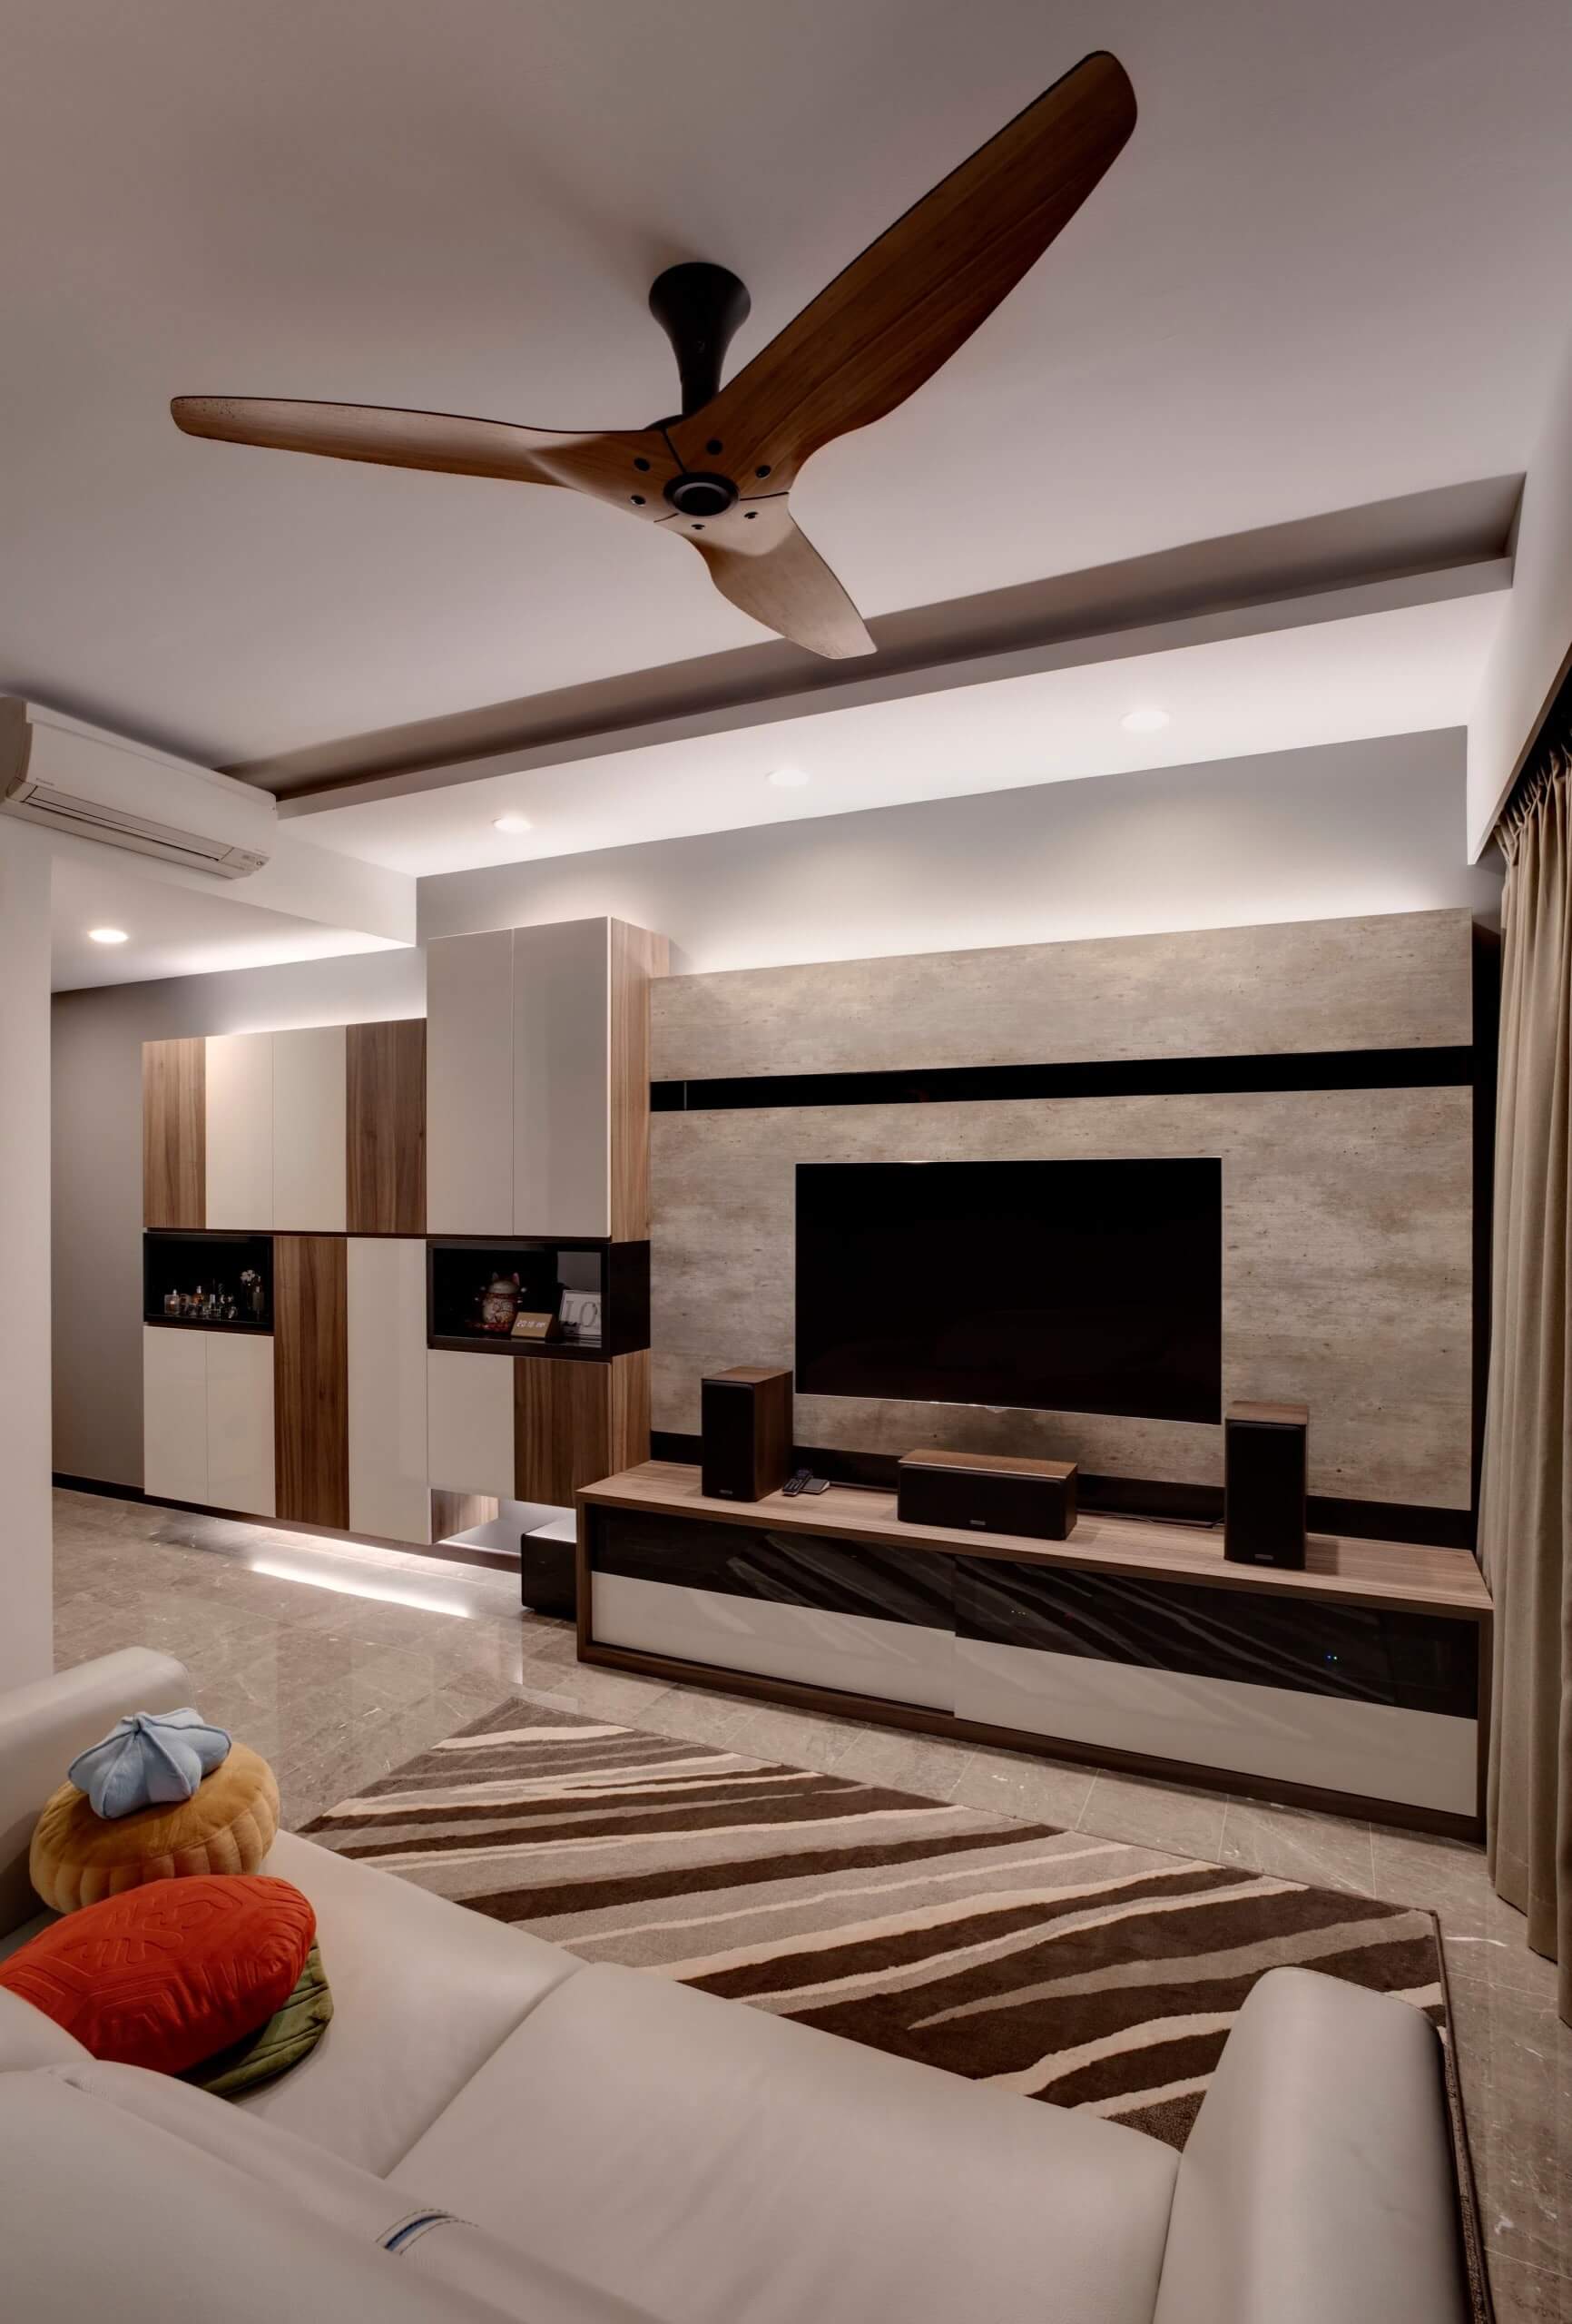 Sophisticated Simplicity River Isles Interior Design Company In